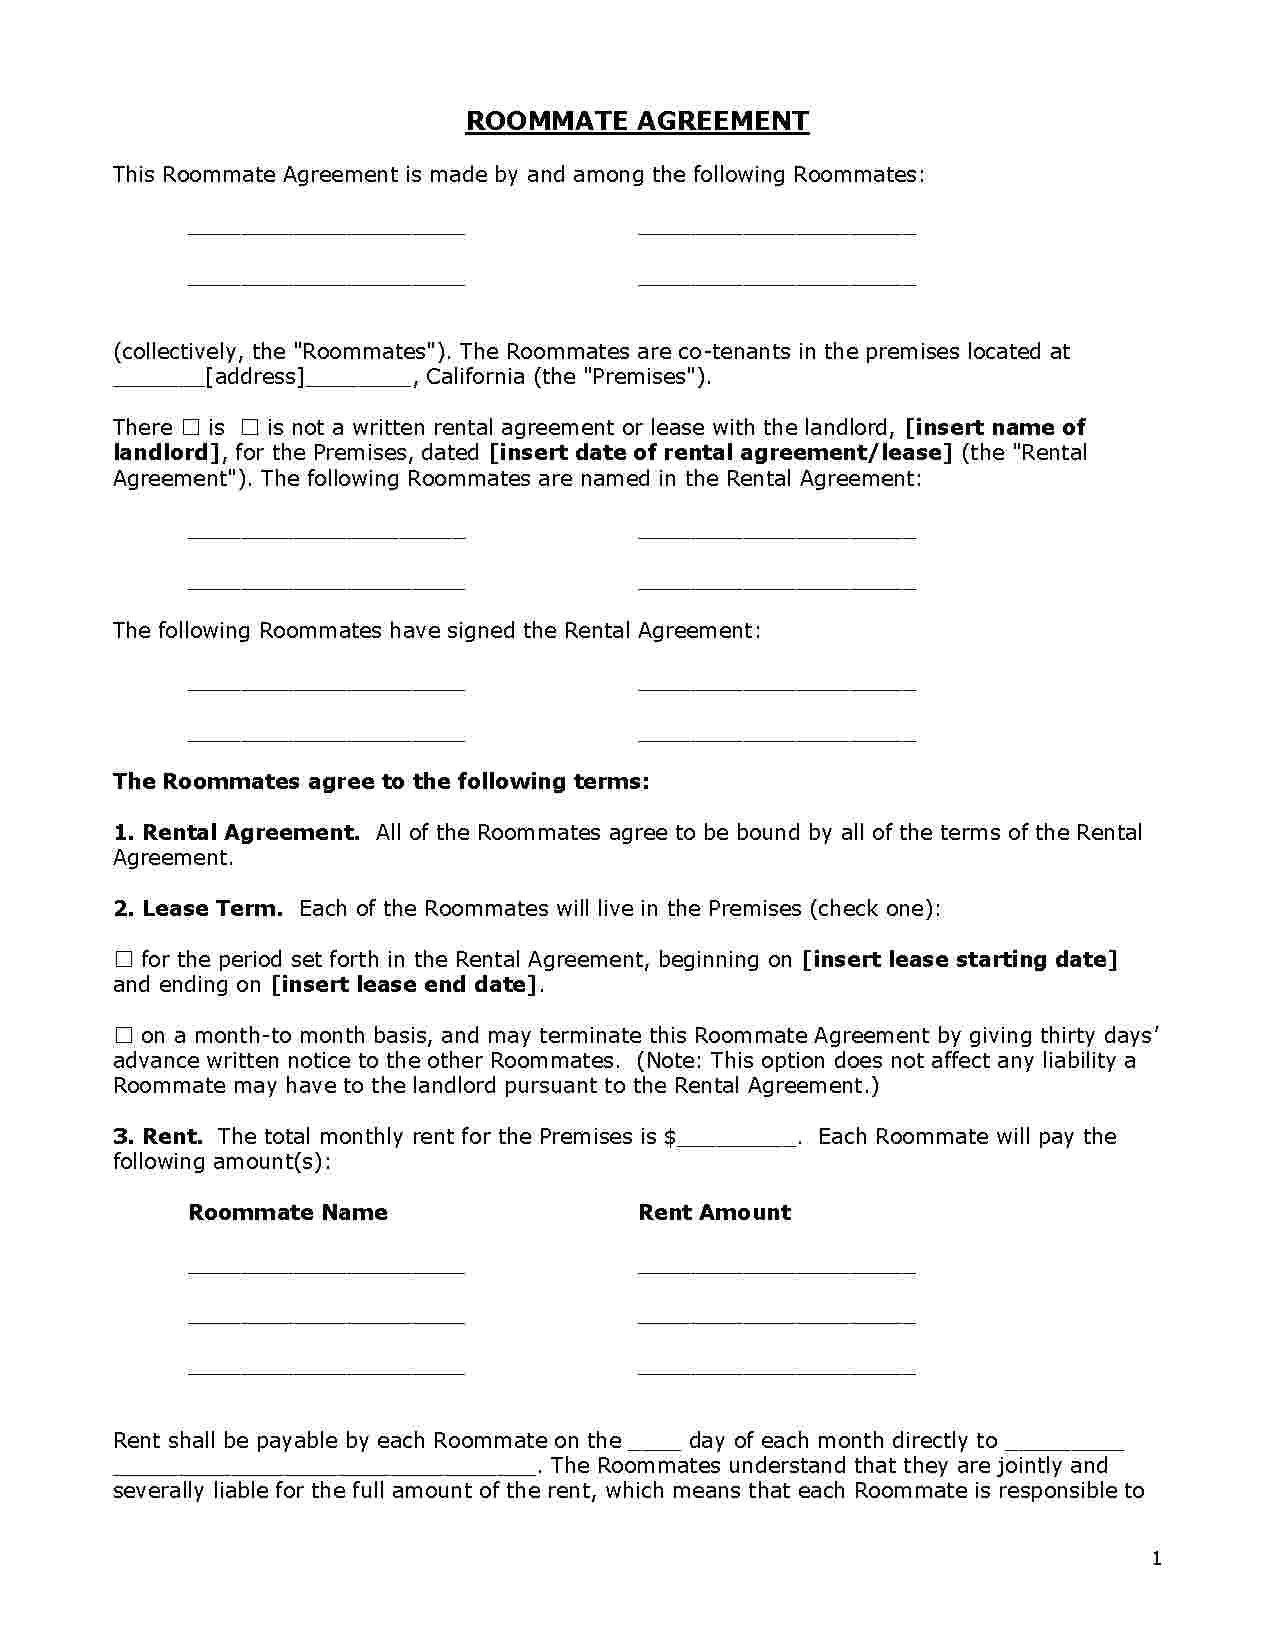 Roommate Agreement Template Word Download Roommate Agreement Style 11 Template For Free At Templates